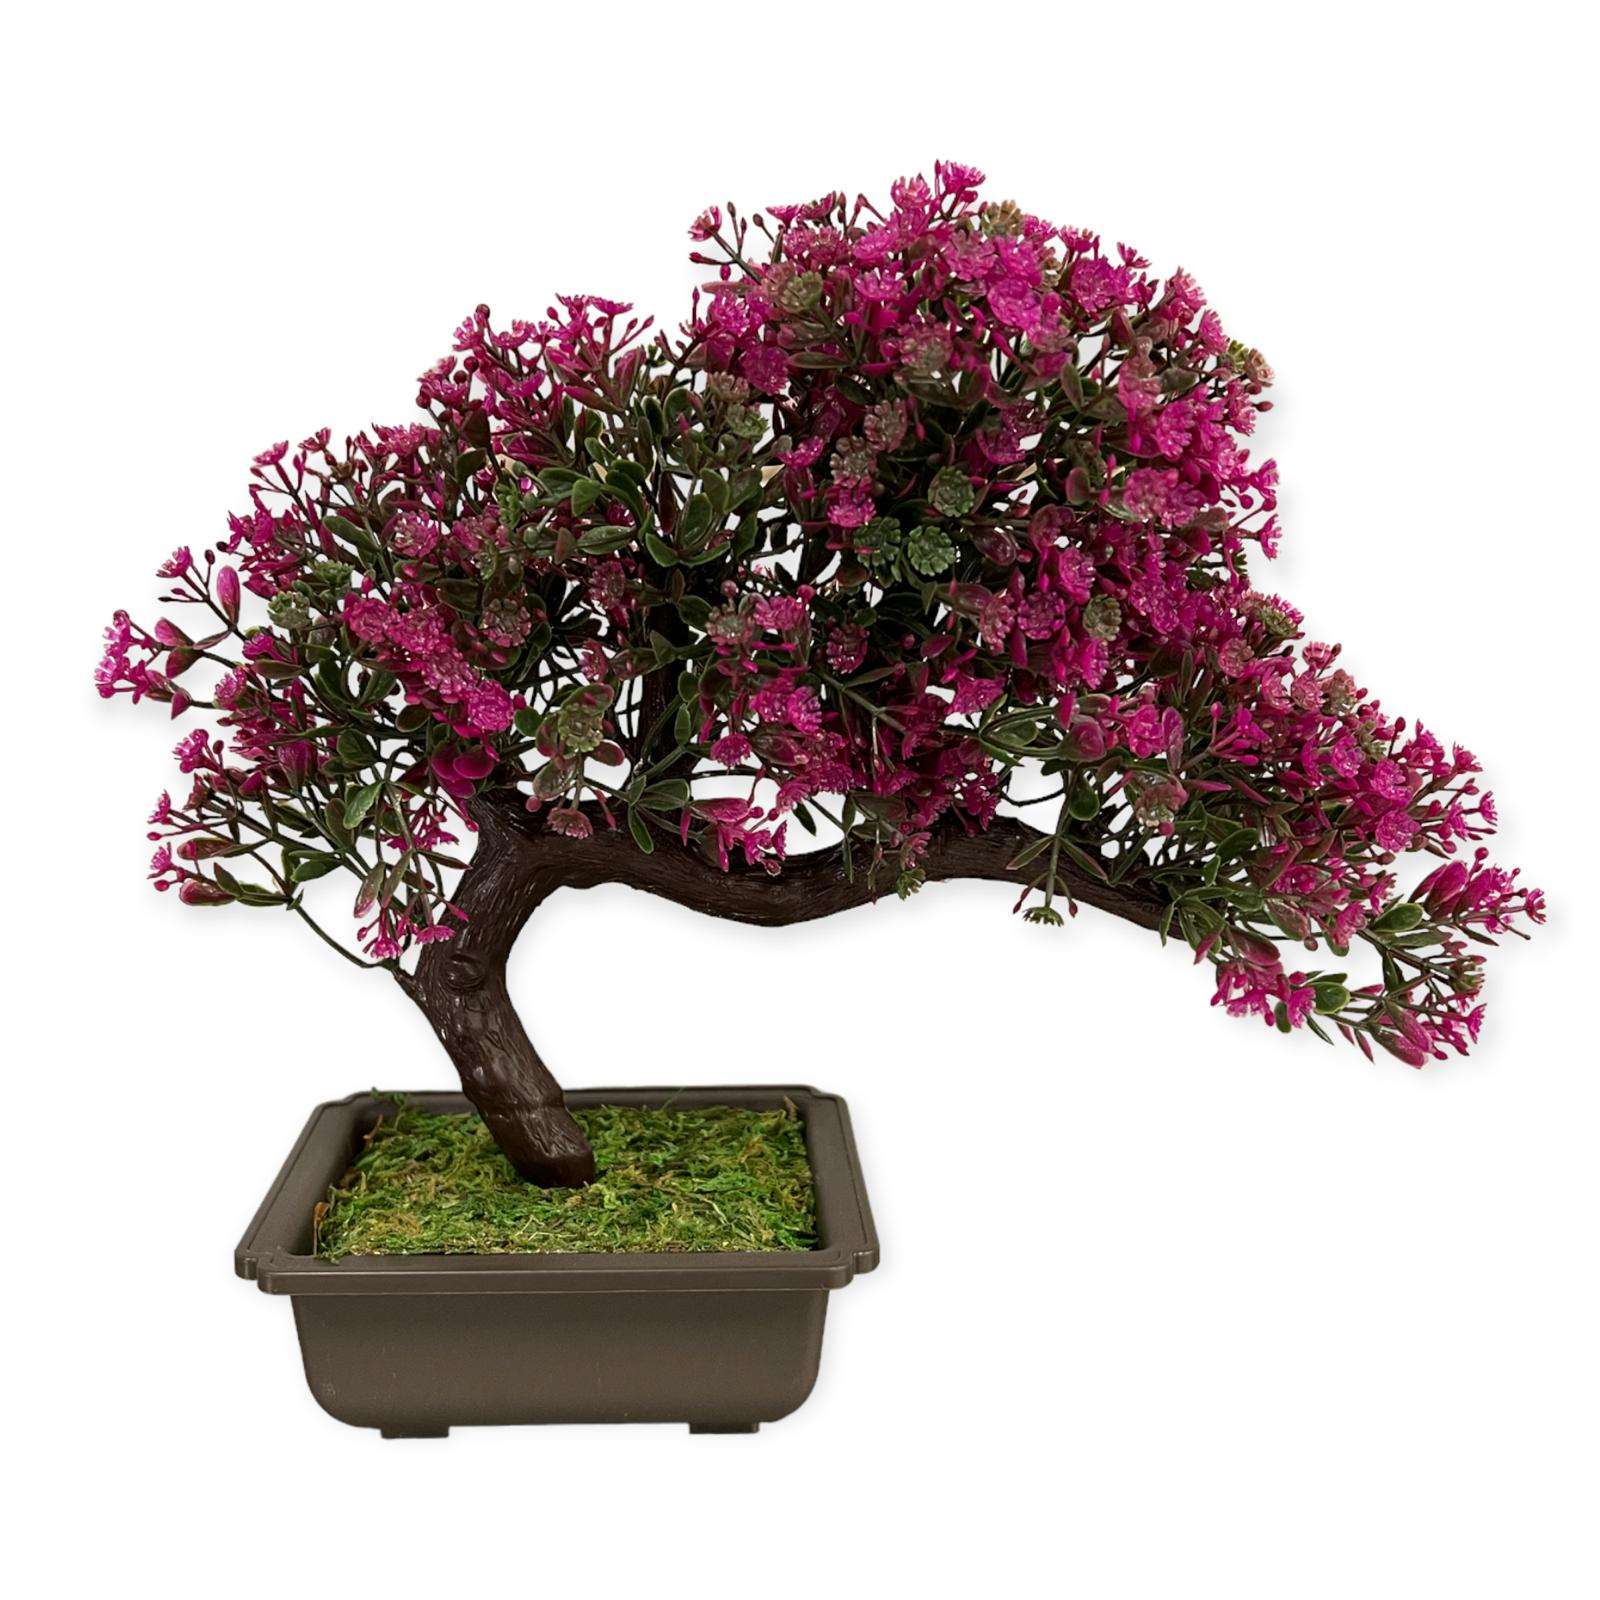 Artificial : Sideways Bonsai in Purple Color Online on Sale from HnG Nursery for trees & plants